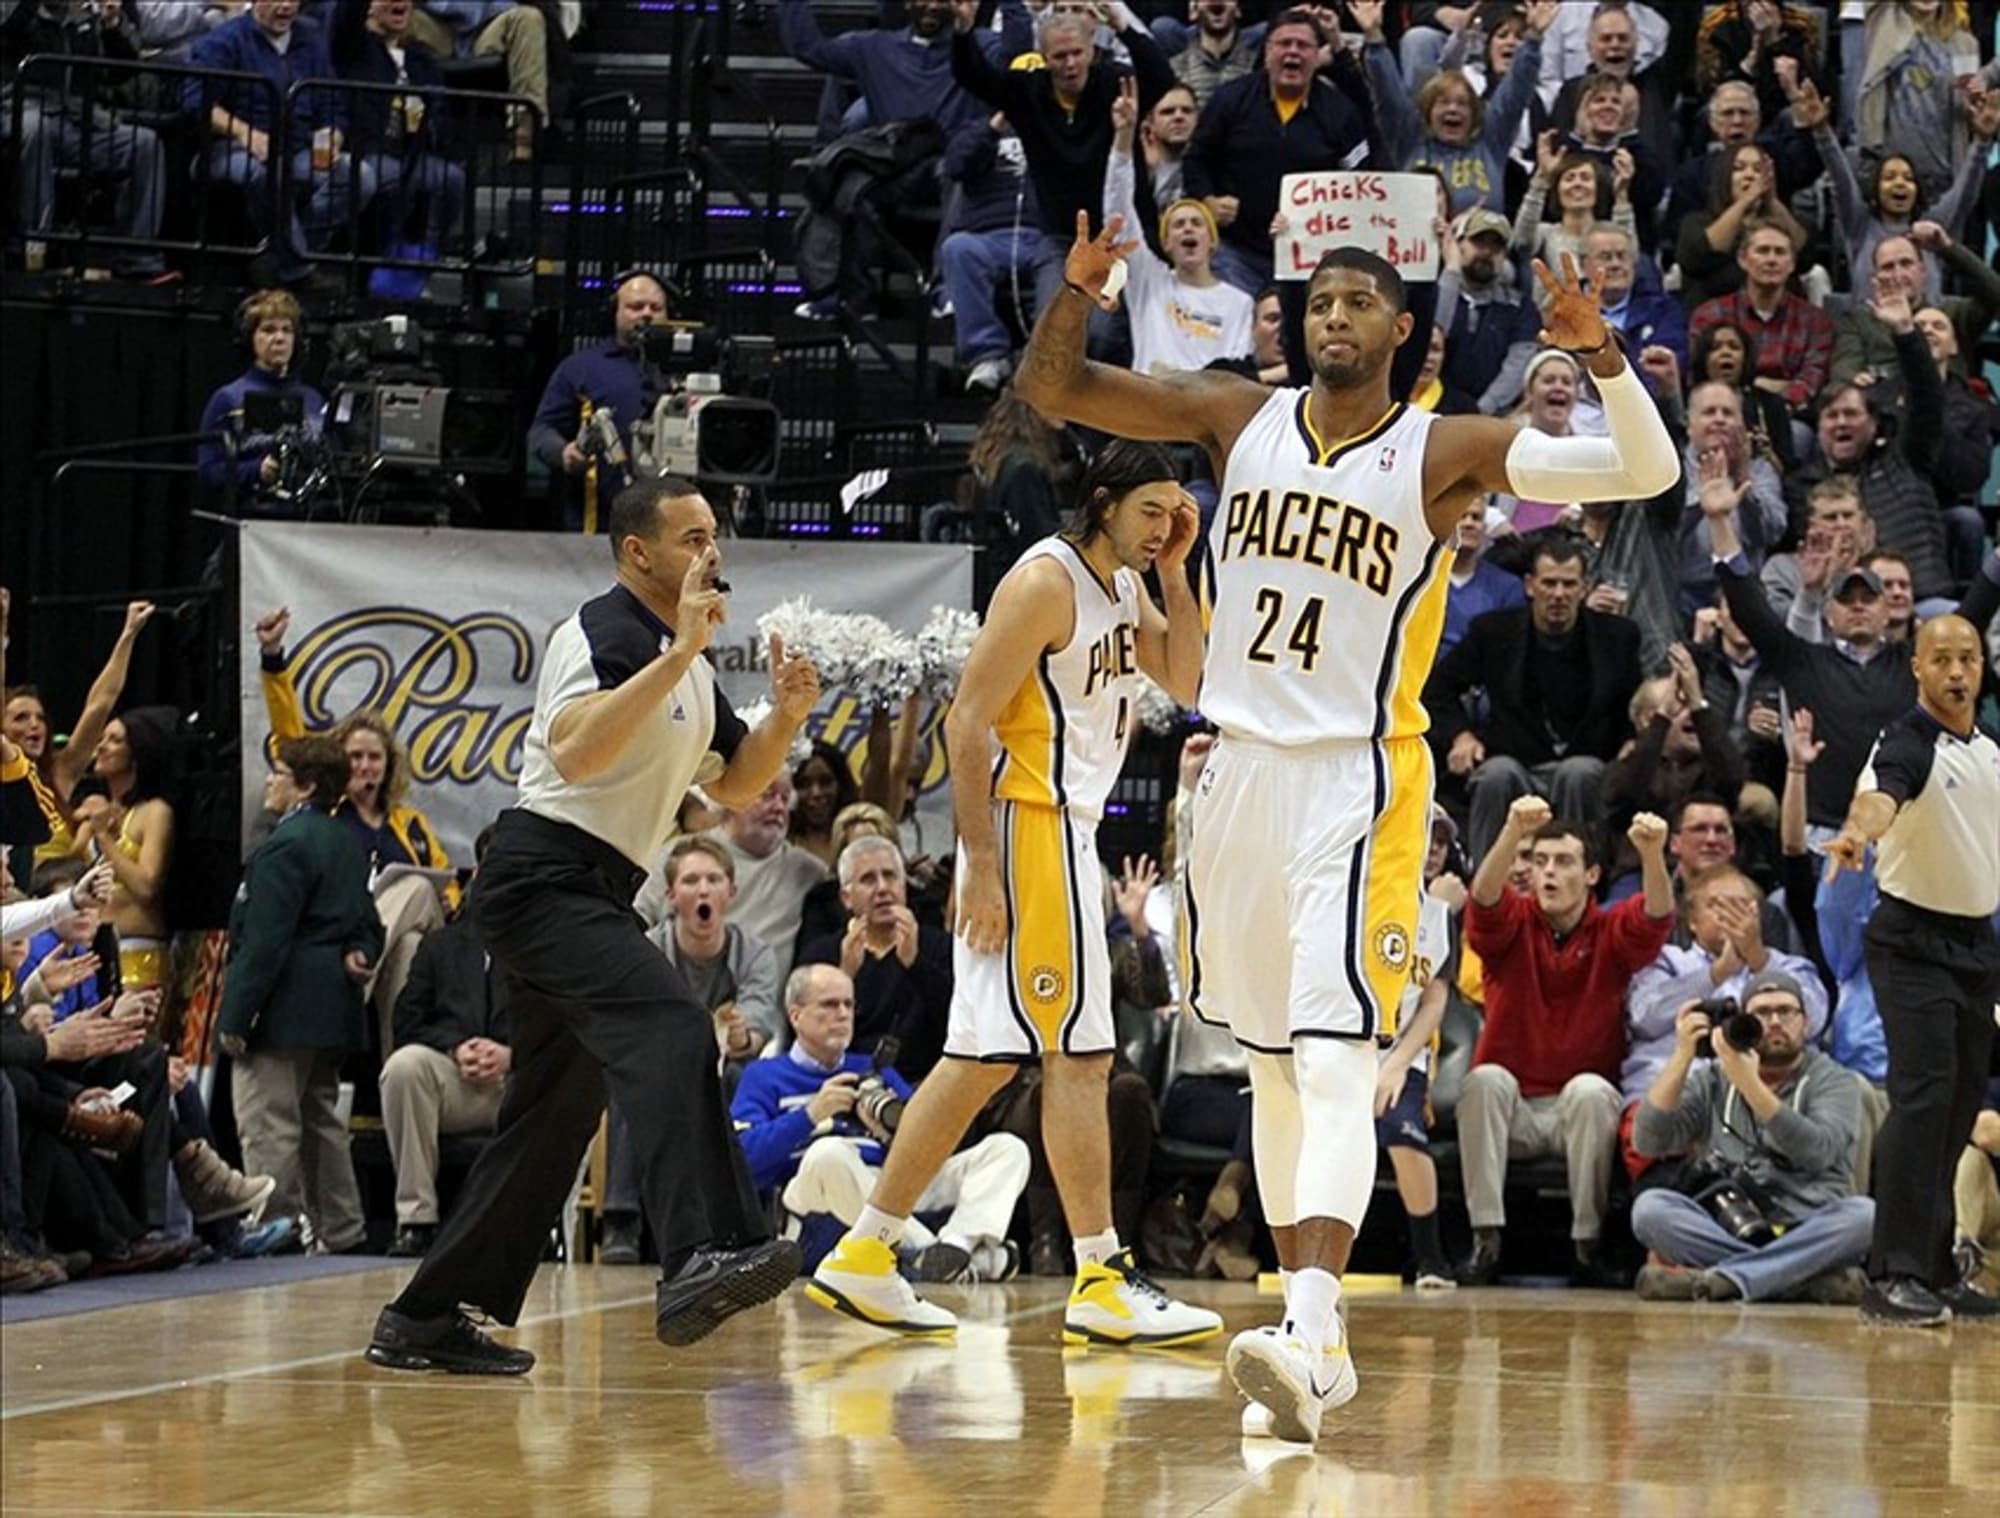 Watch: Paul George with 360 Windmill dunk